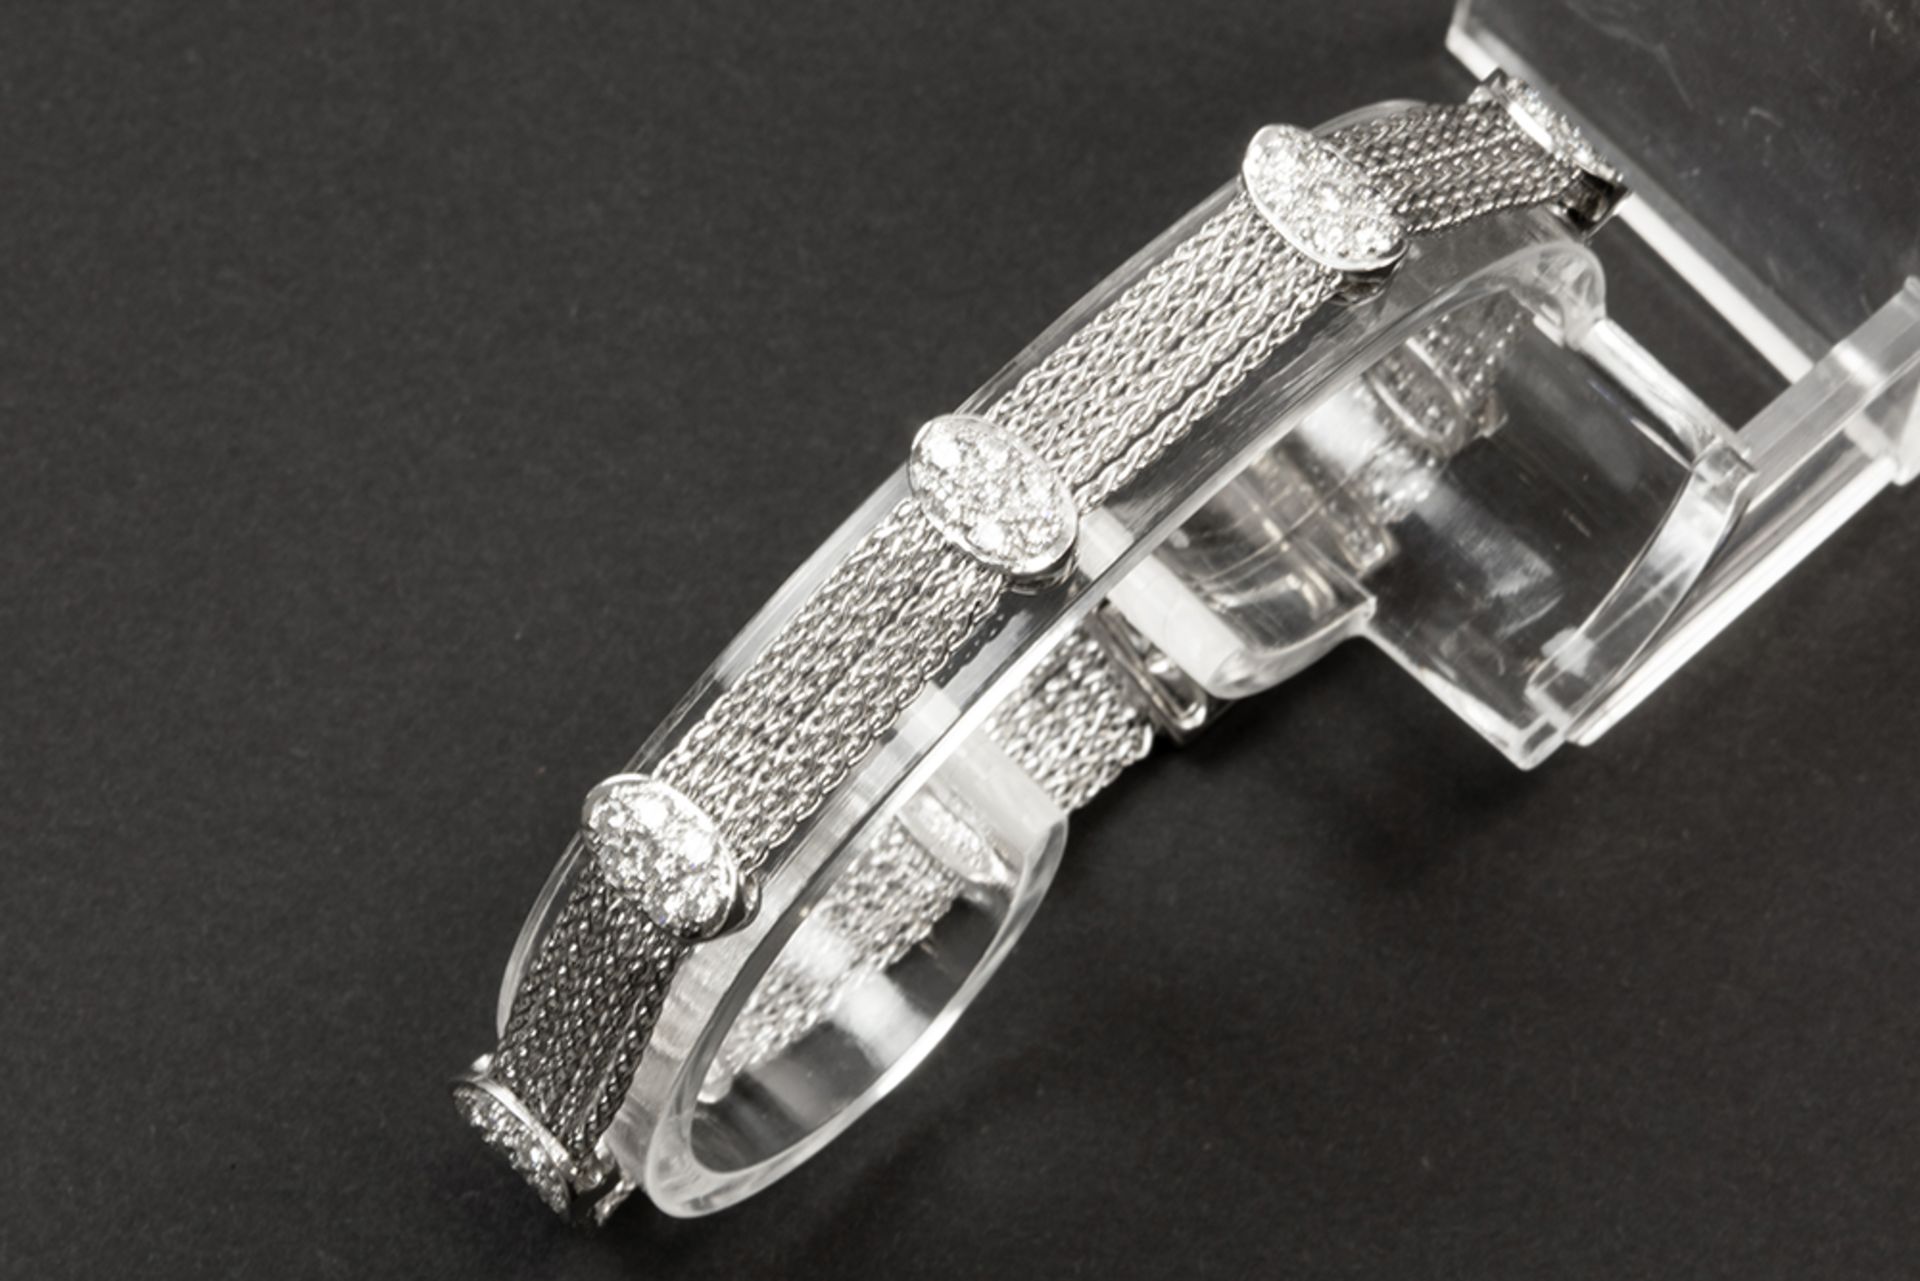 bracelet in white gold (18 carat) with at least 2,10 carat of very high quality brilliant cut